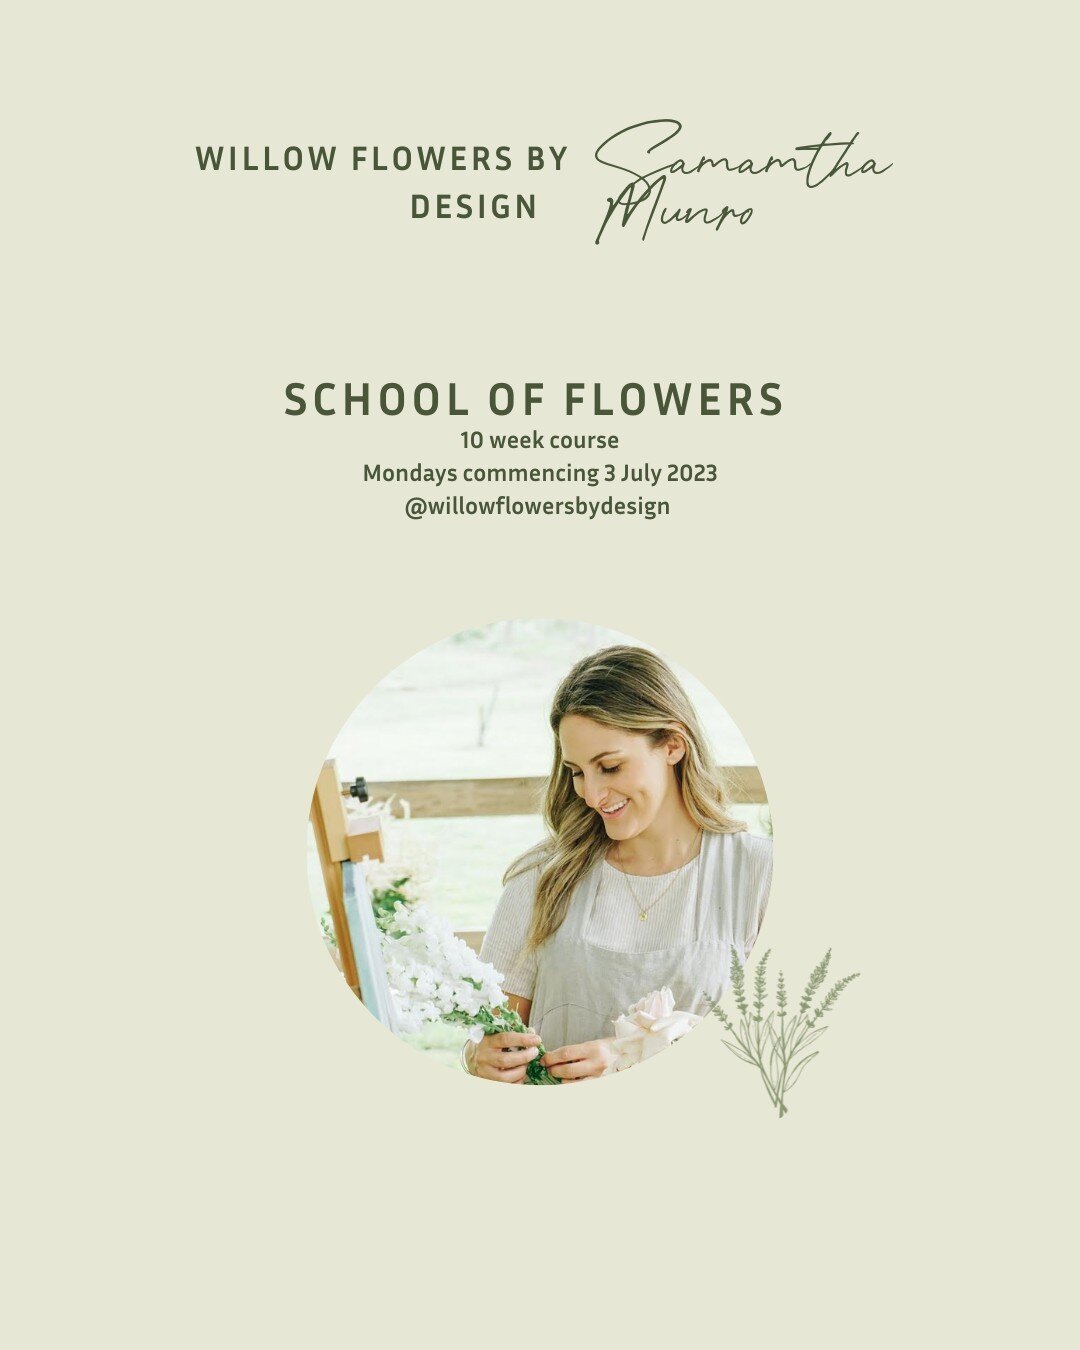 Samantha Munro's - School of Flowers⁠
⁠
10 week course commencing Monday 3 July 2023.⁠
⁠
For further information and bookings contact:⁠
Samantha Munro⁠
@willowflowersbydesign⁠
www.willowsflowersbydesign.com⁠